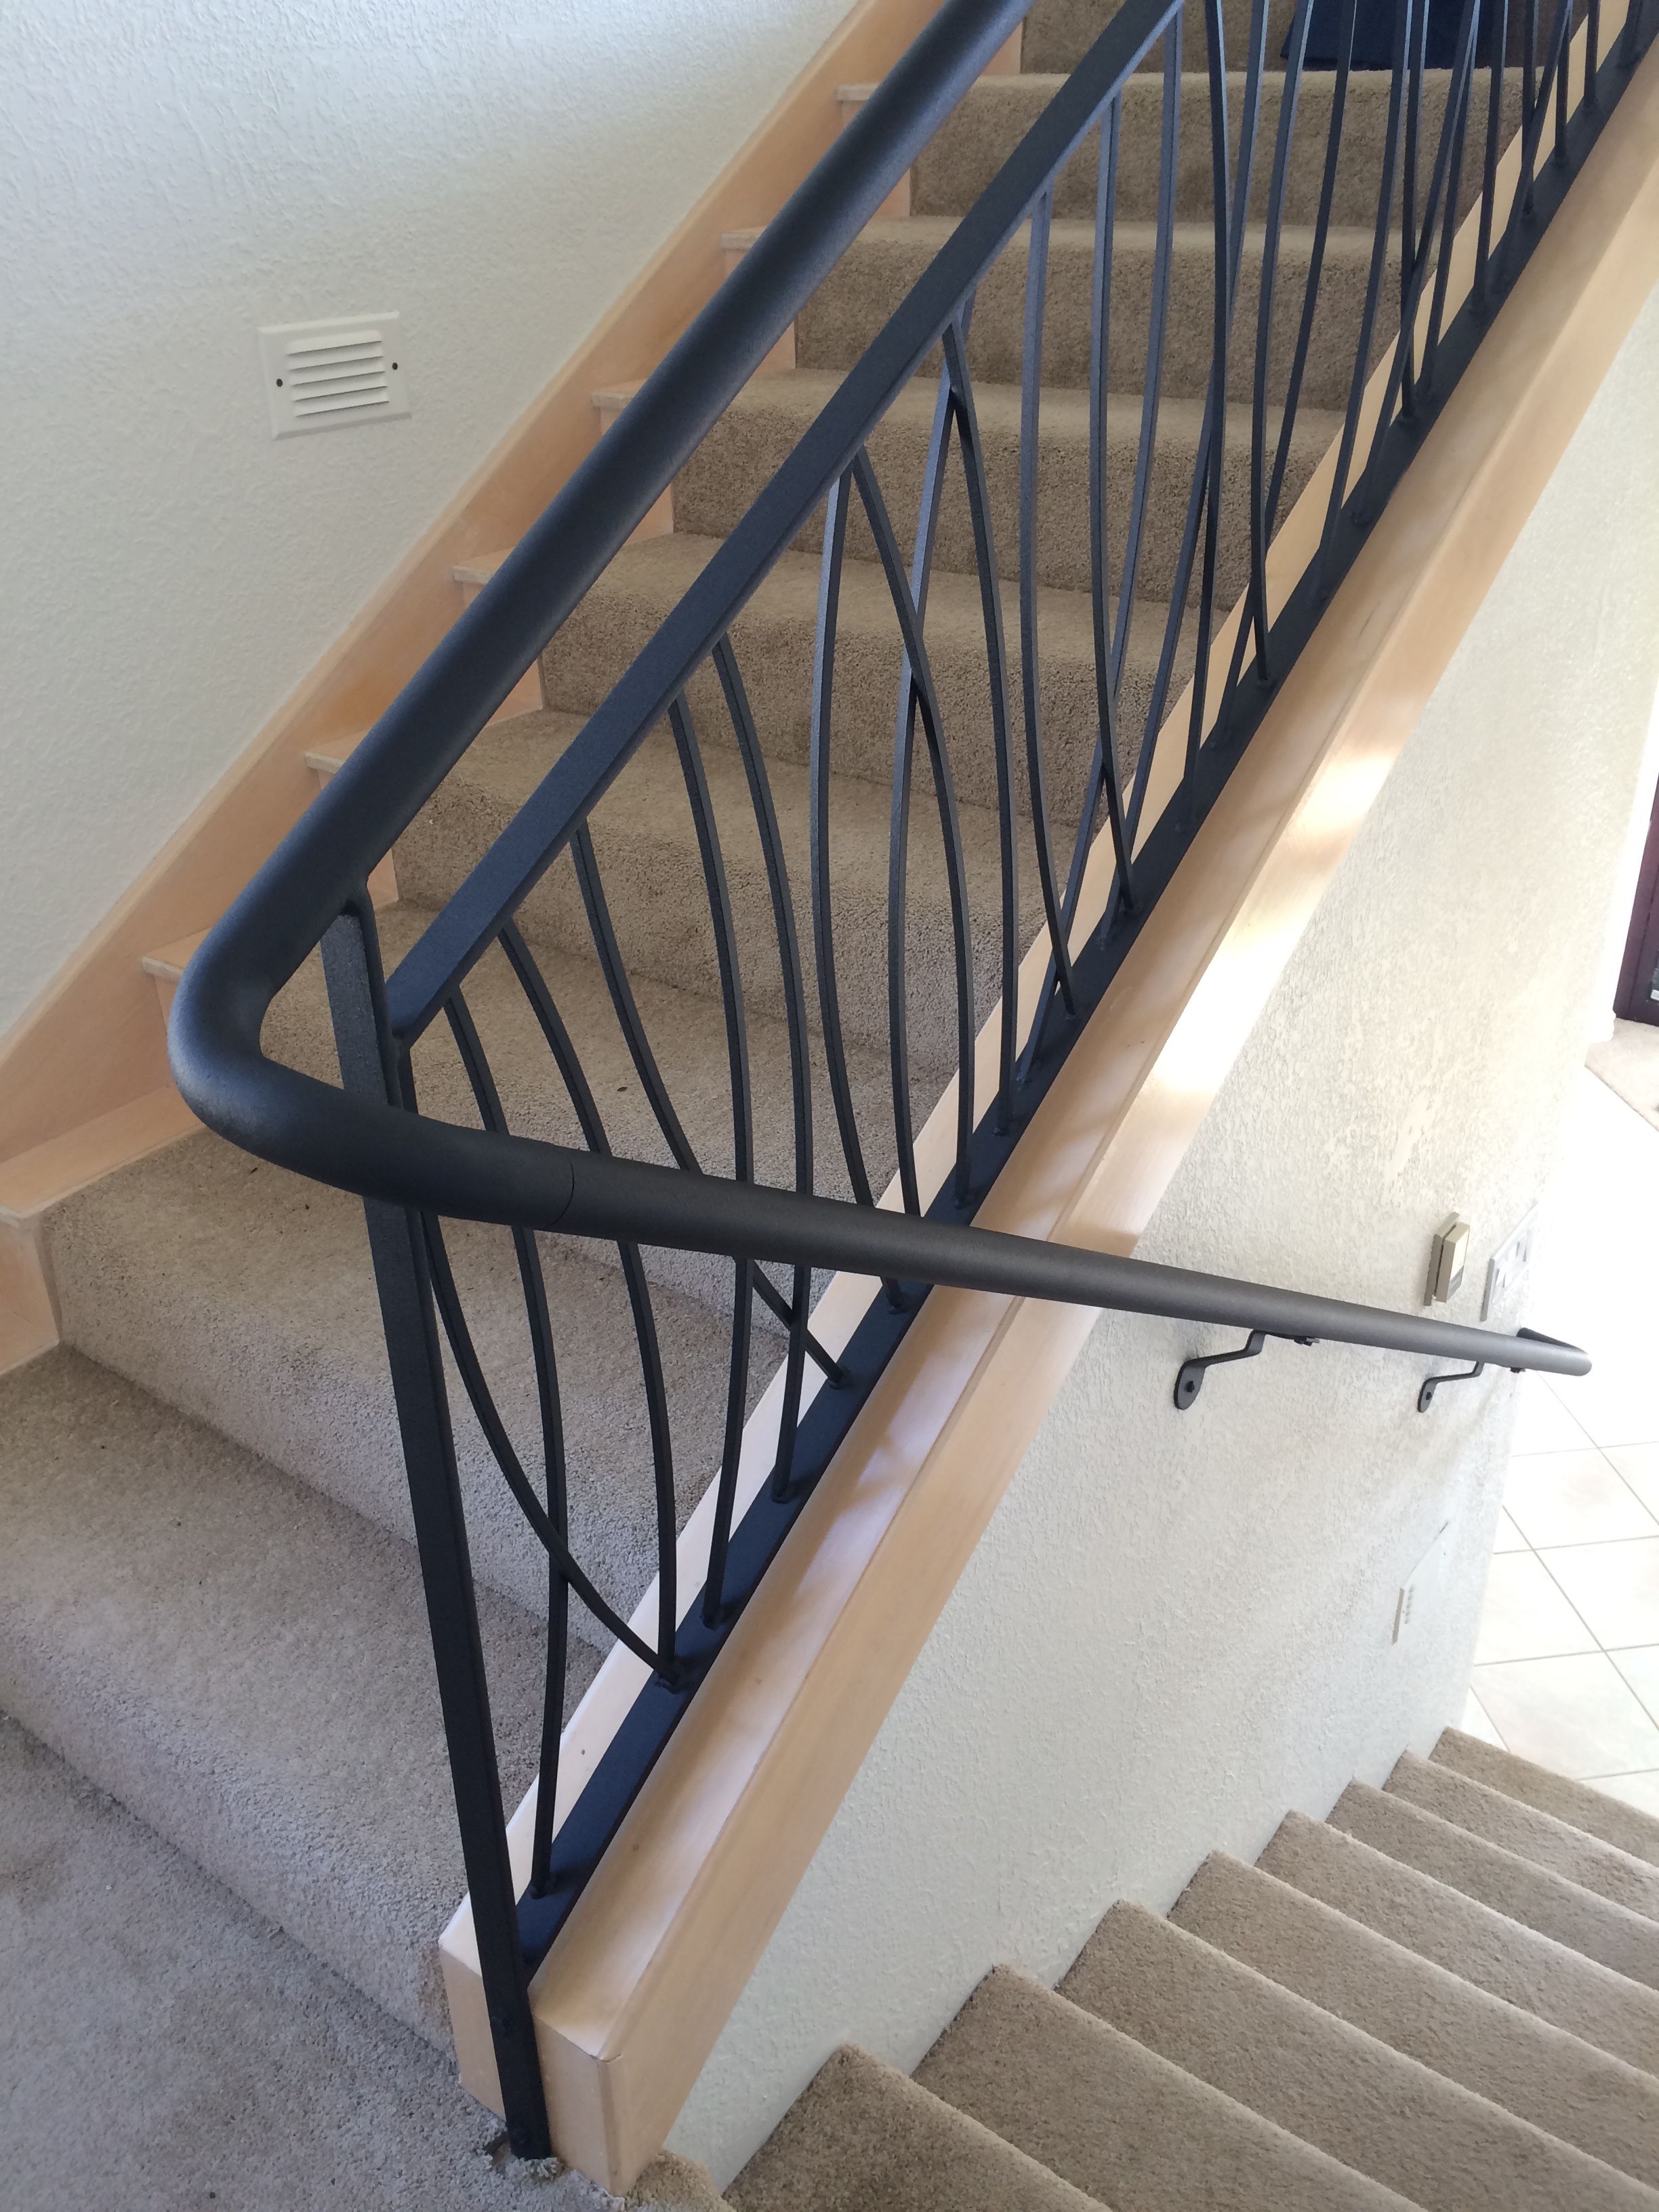 Custom residential wall mount stair rail system with 